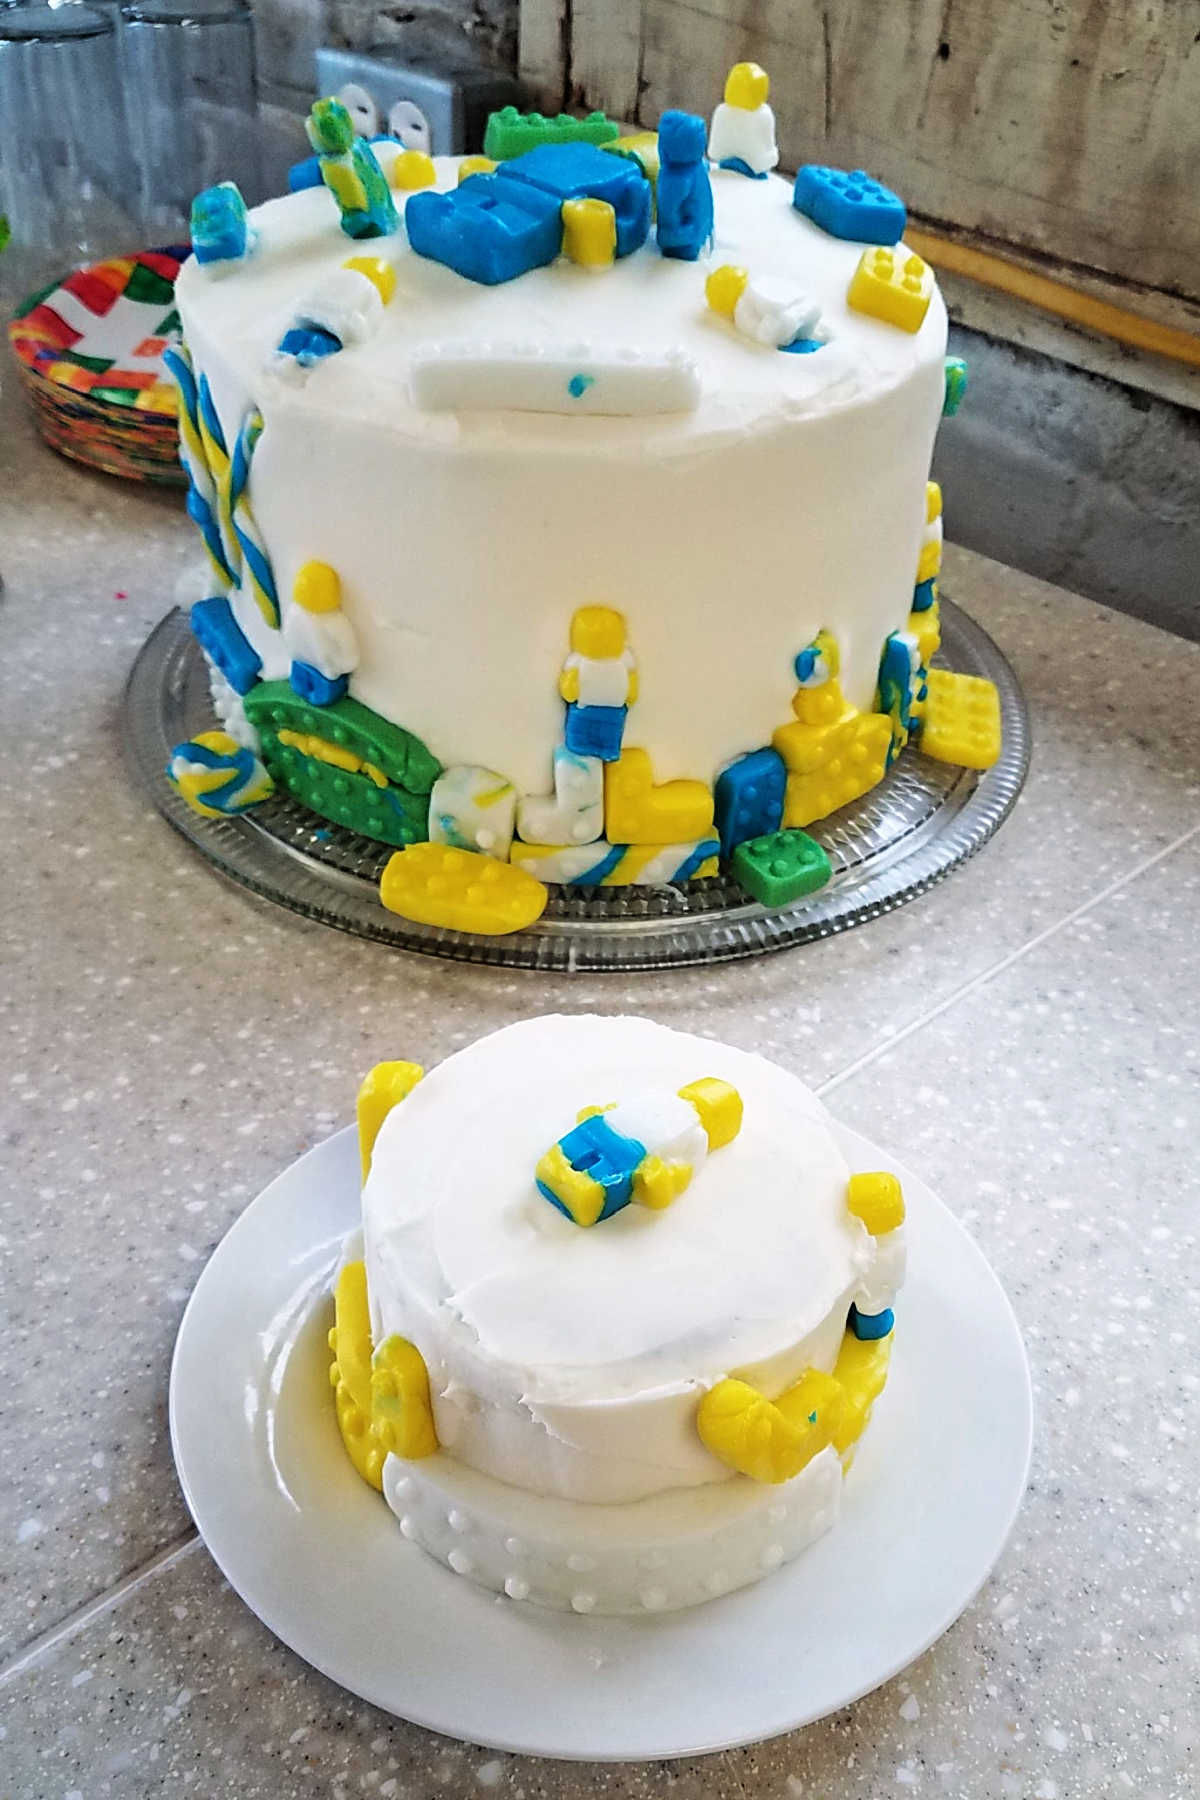 A small and large cake with marshmallow buttercream and decorated with fondant legos.